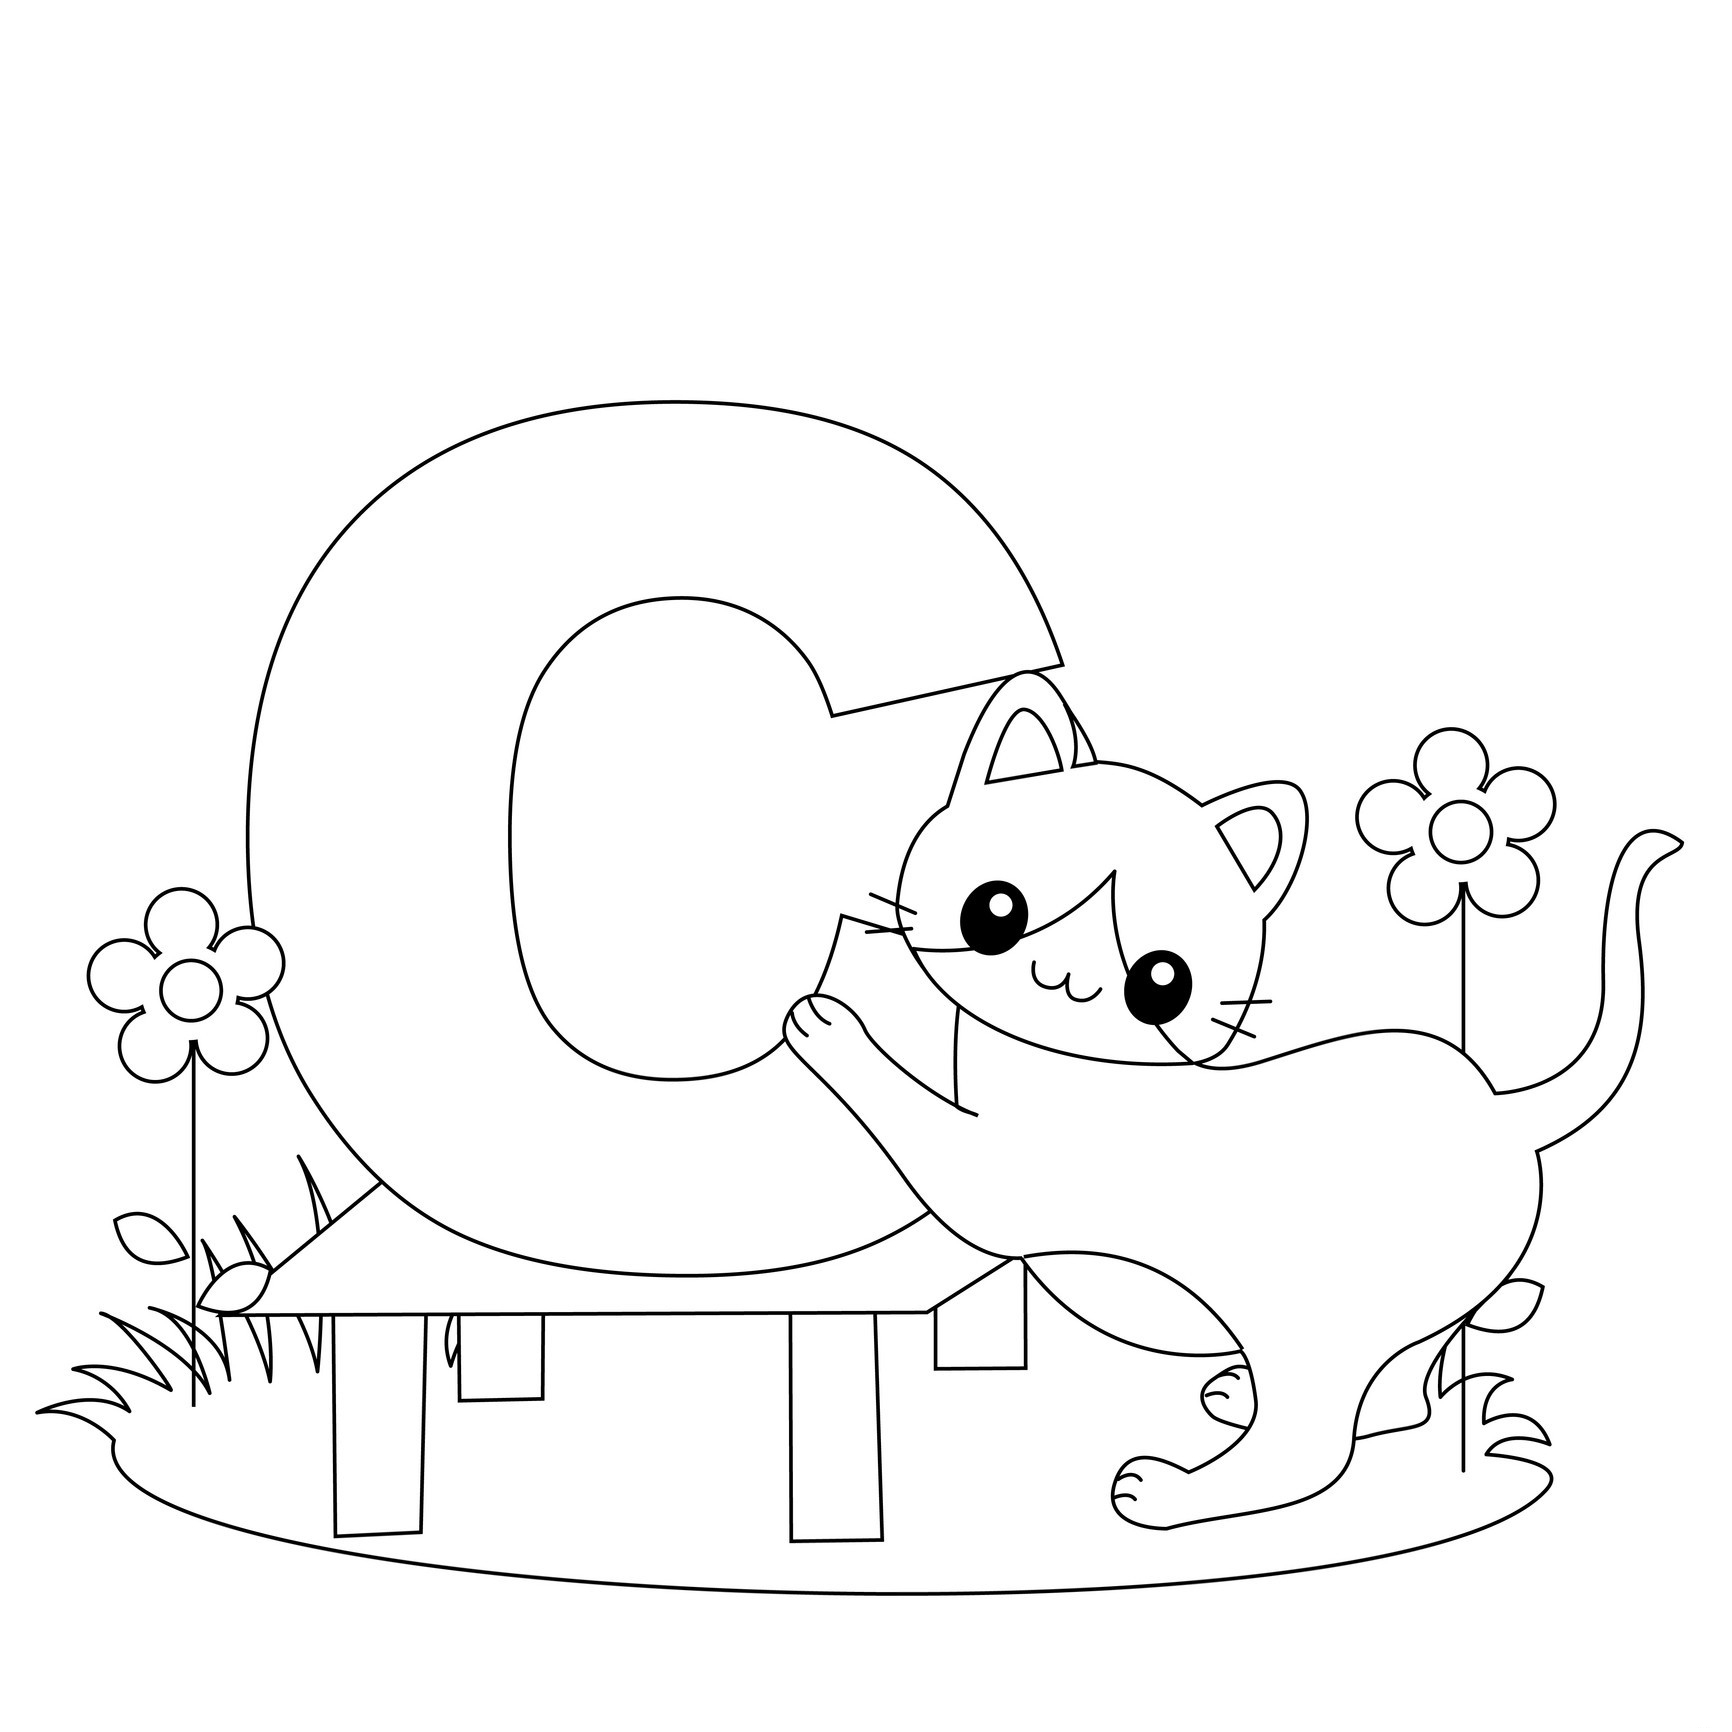  Free Coloring Pages Alphabet 2